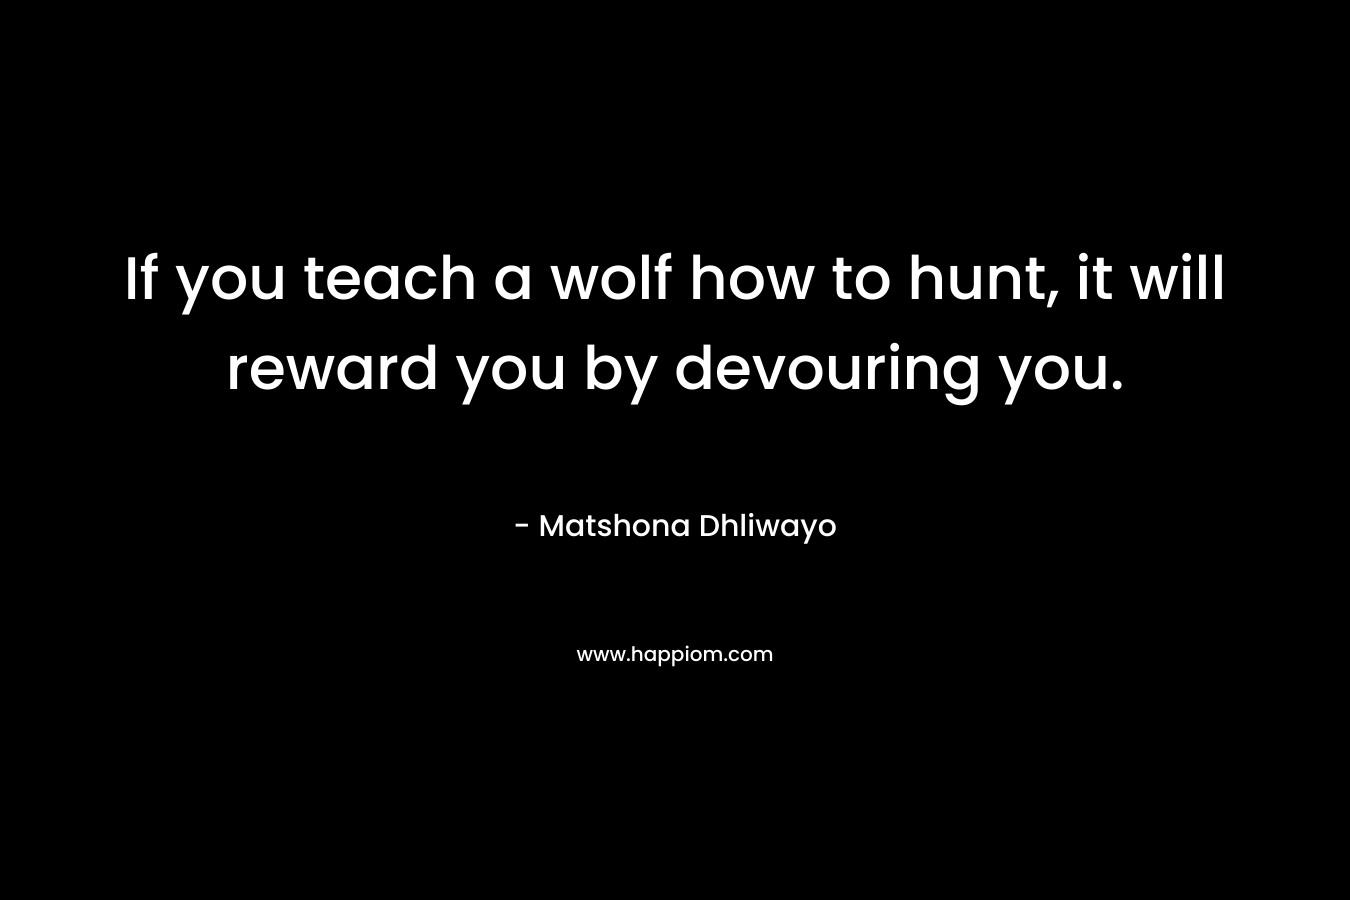 If you teach a wolf how to hunt, it will reward you by devouring you. – Matshona Dhliwayo